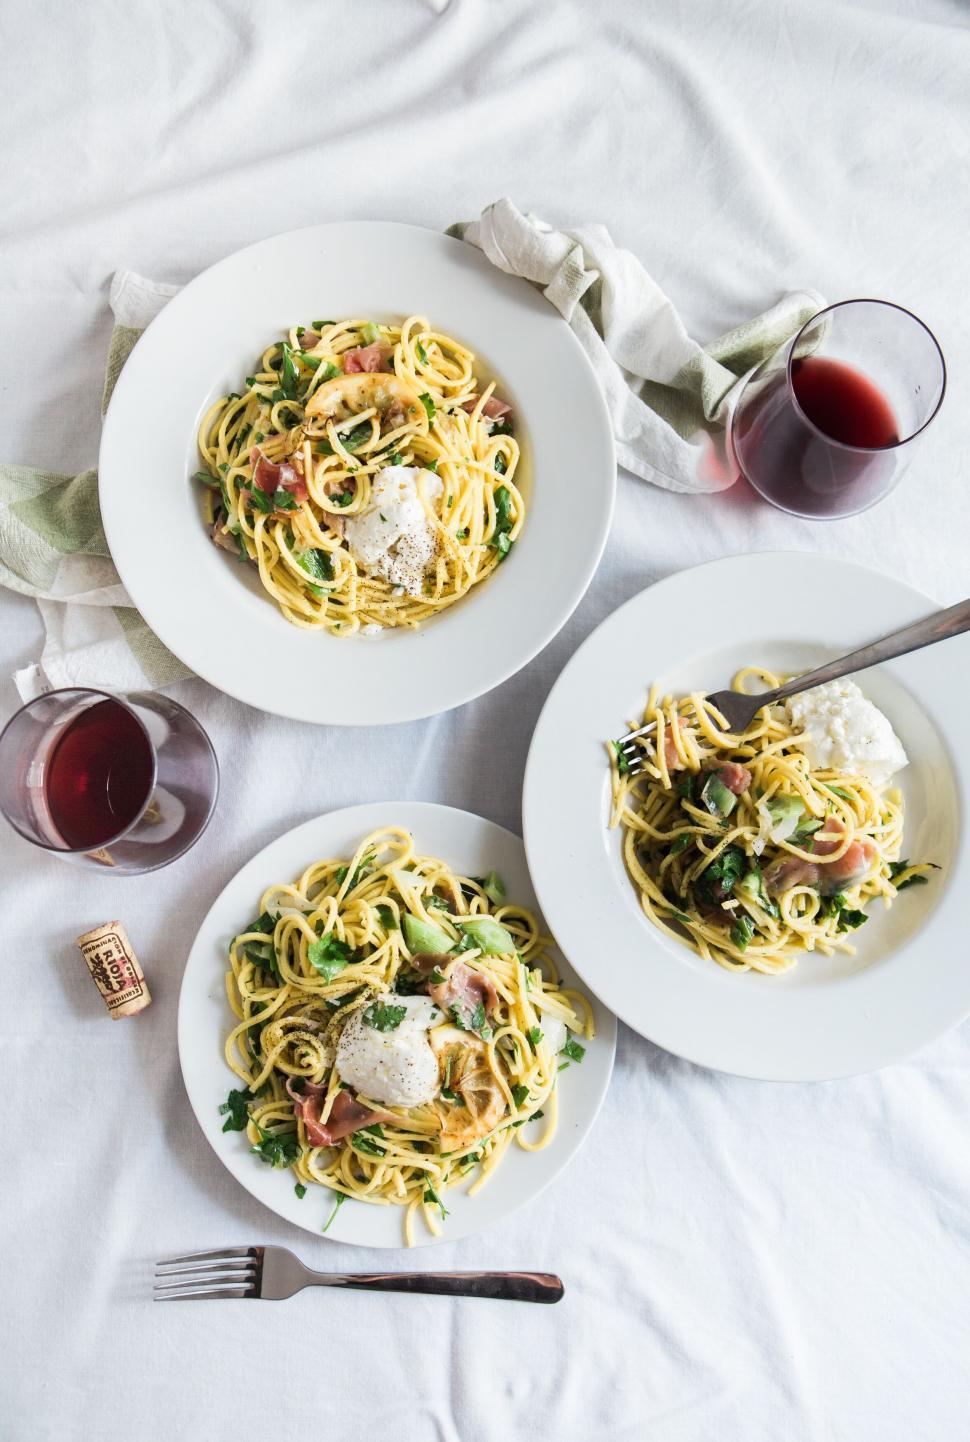 Free Image of Pasta dishes with wine on a bed setting 